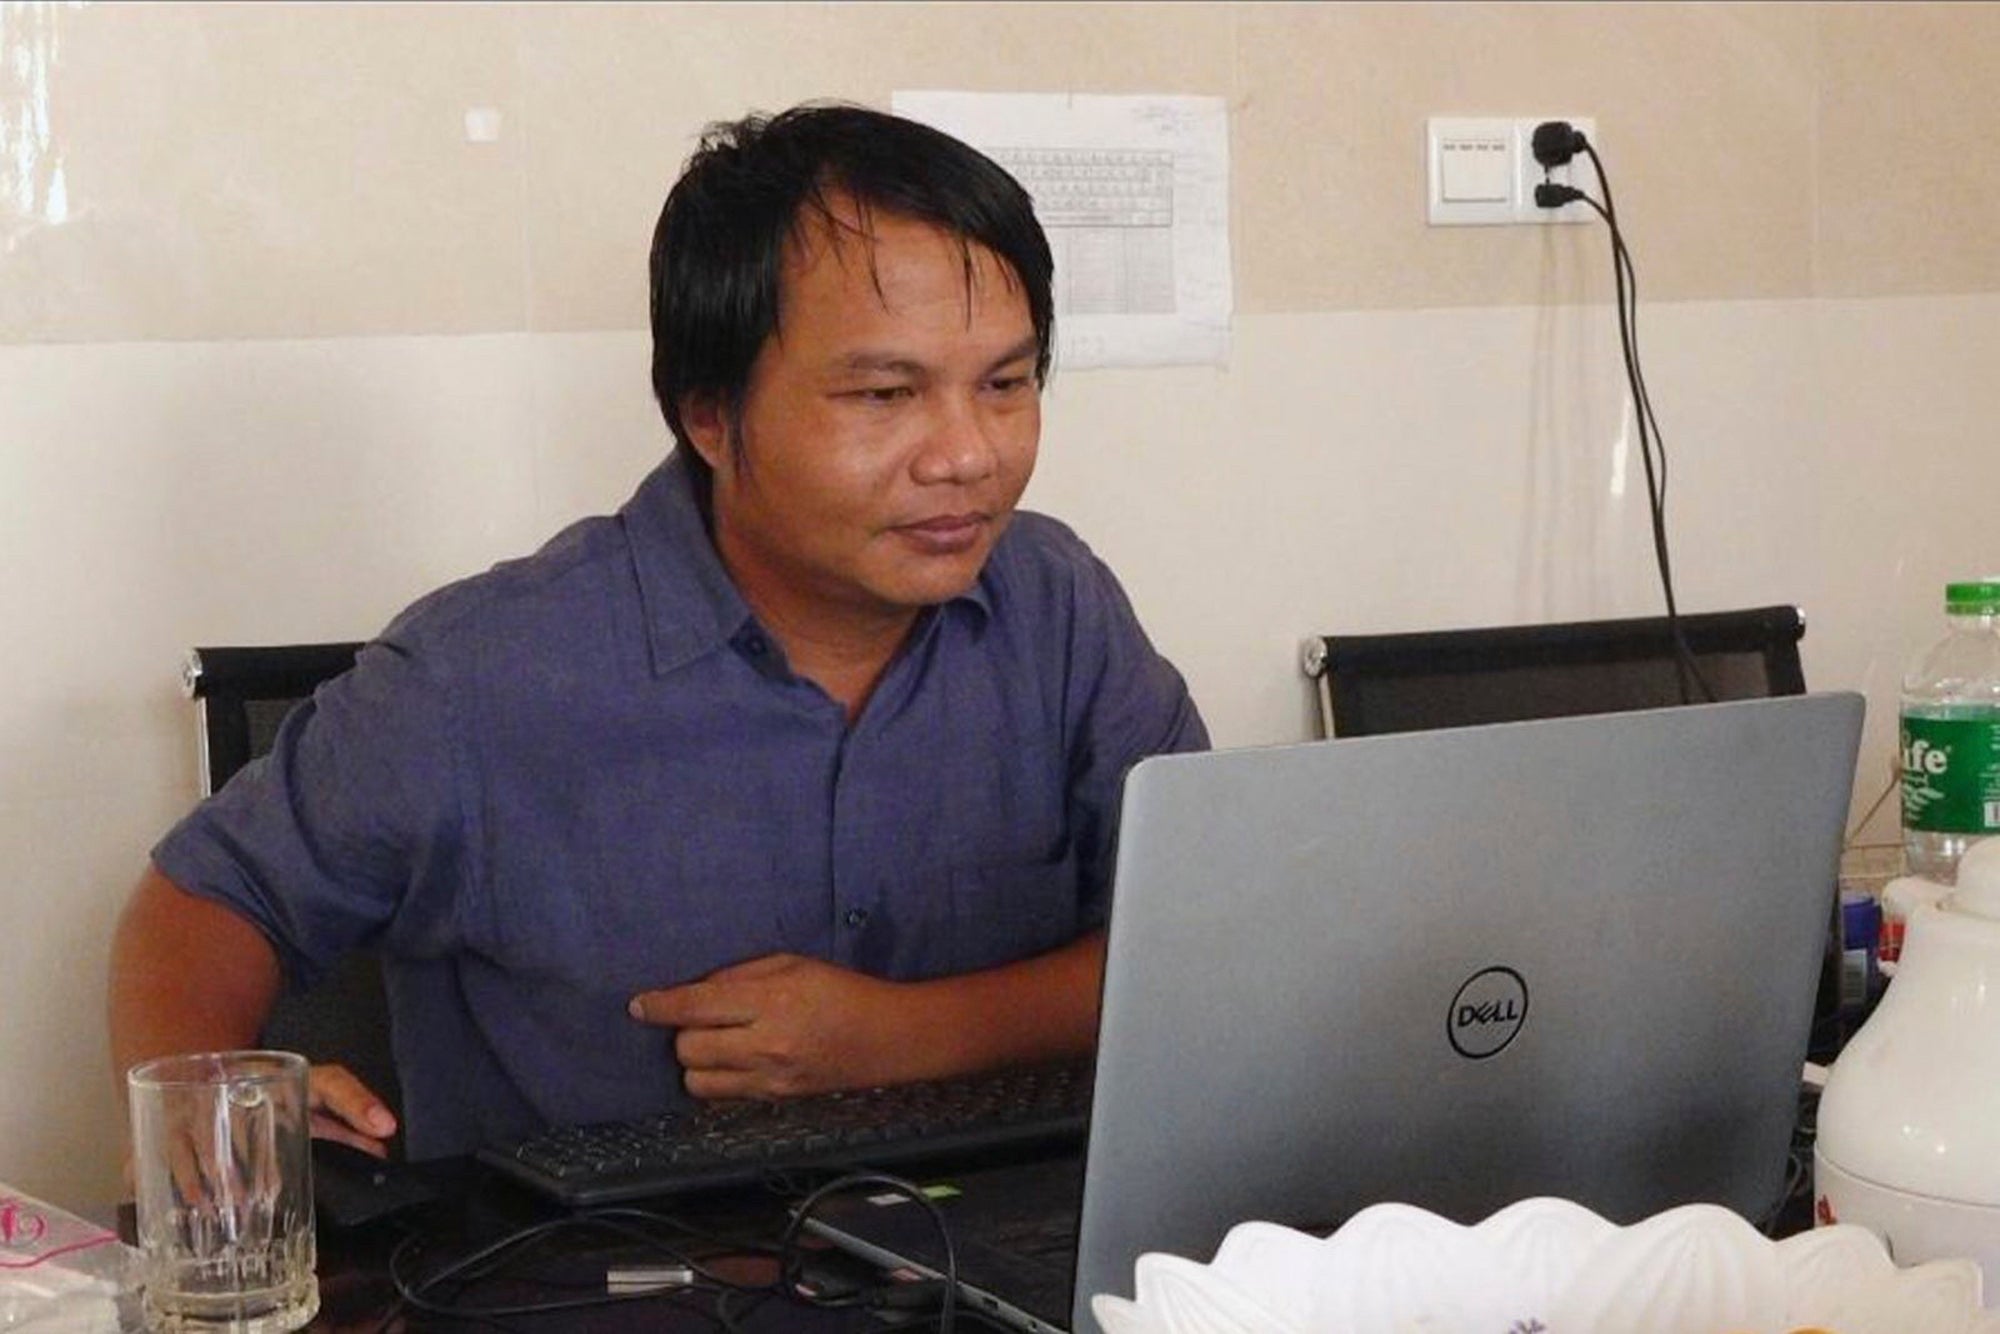 Sai Zaw Thaike, a photojournalist for the independent news website Myanmar Now, works at his desk in Yangon